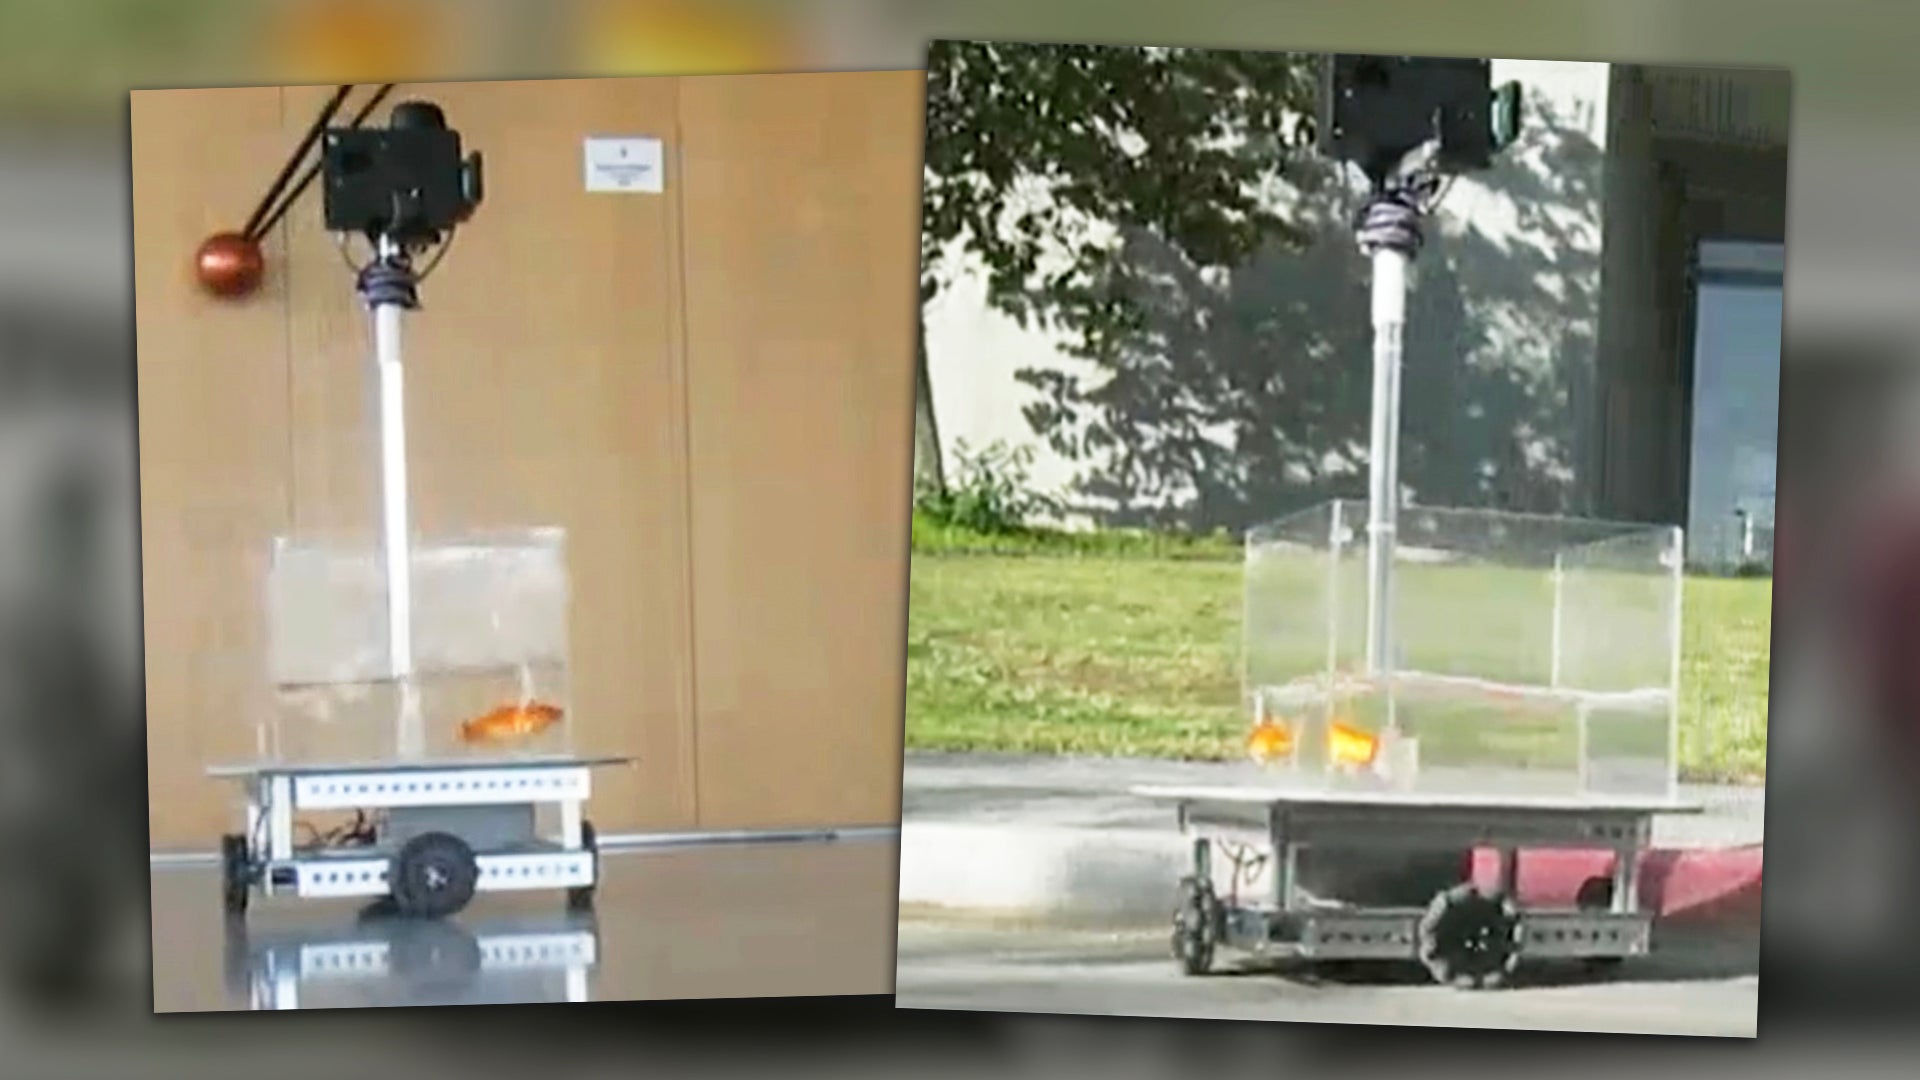 Scientists Trained Goldfish to Drive a Little Car